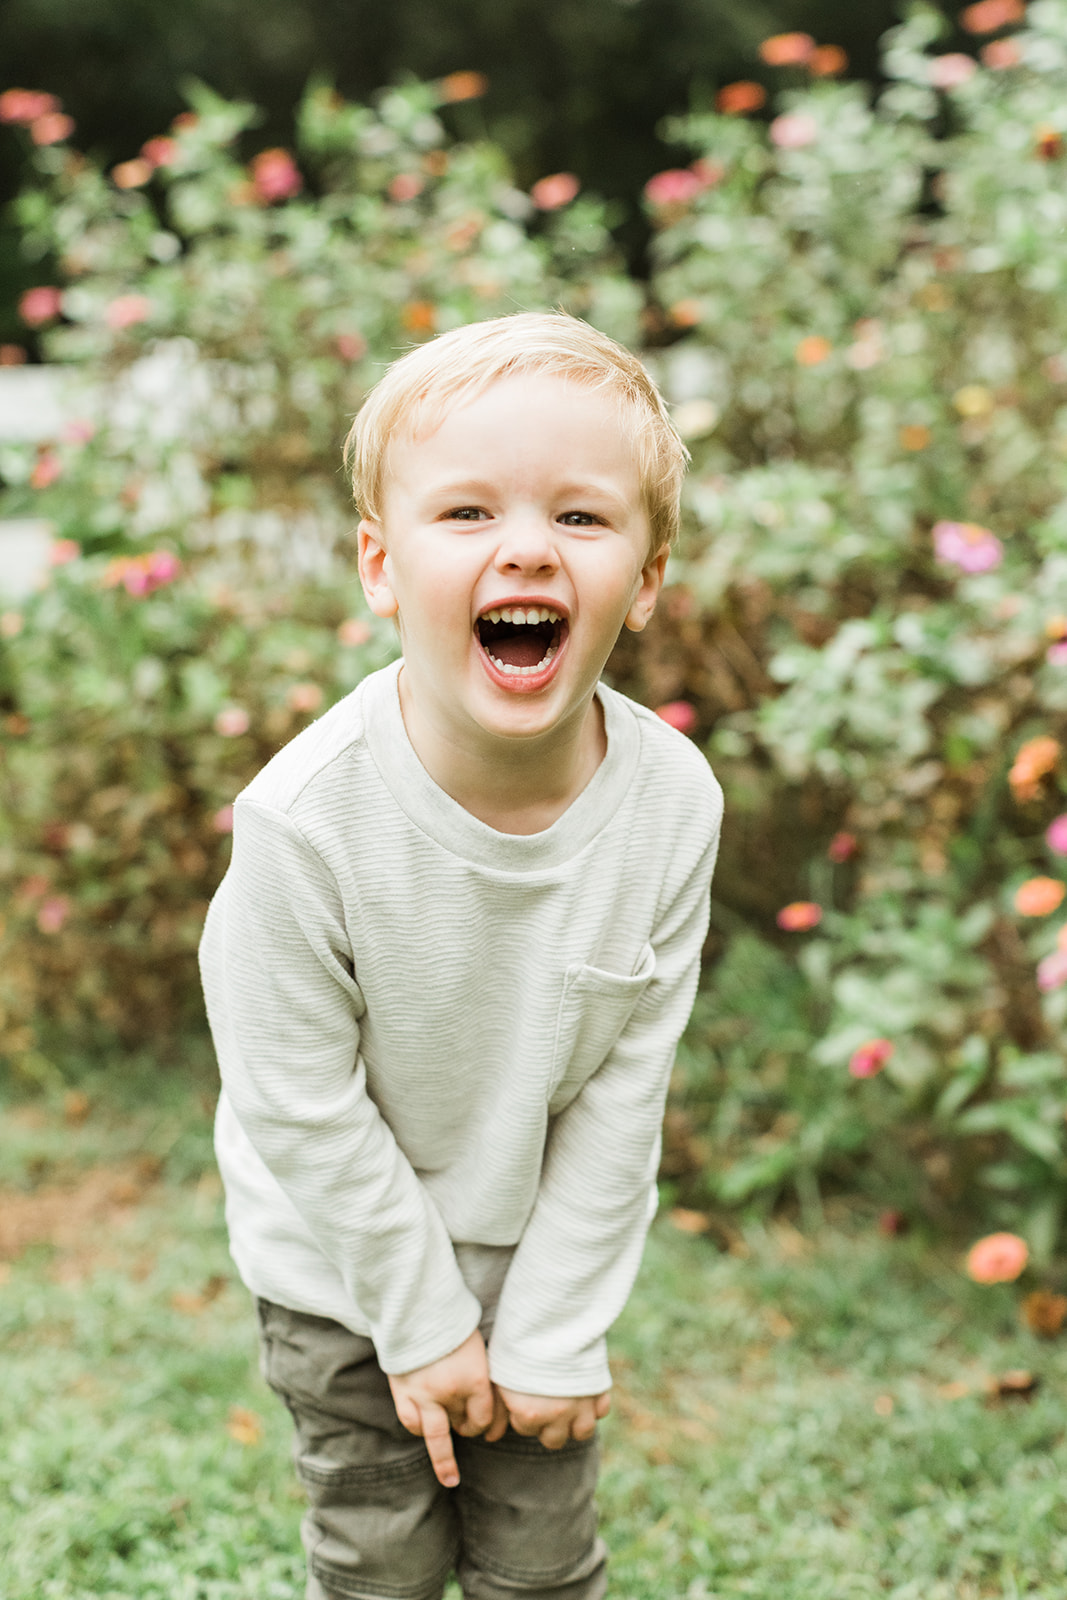 outdoor family session in nashville tennessee. little boy portrait